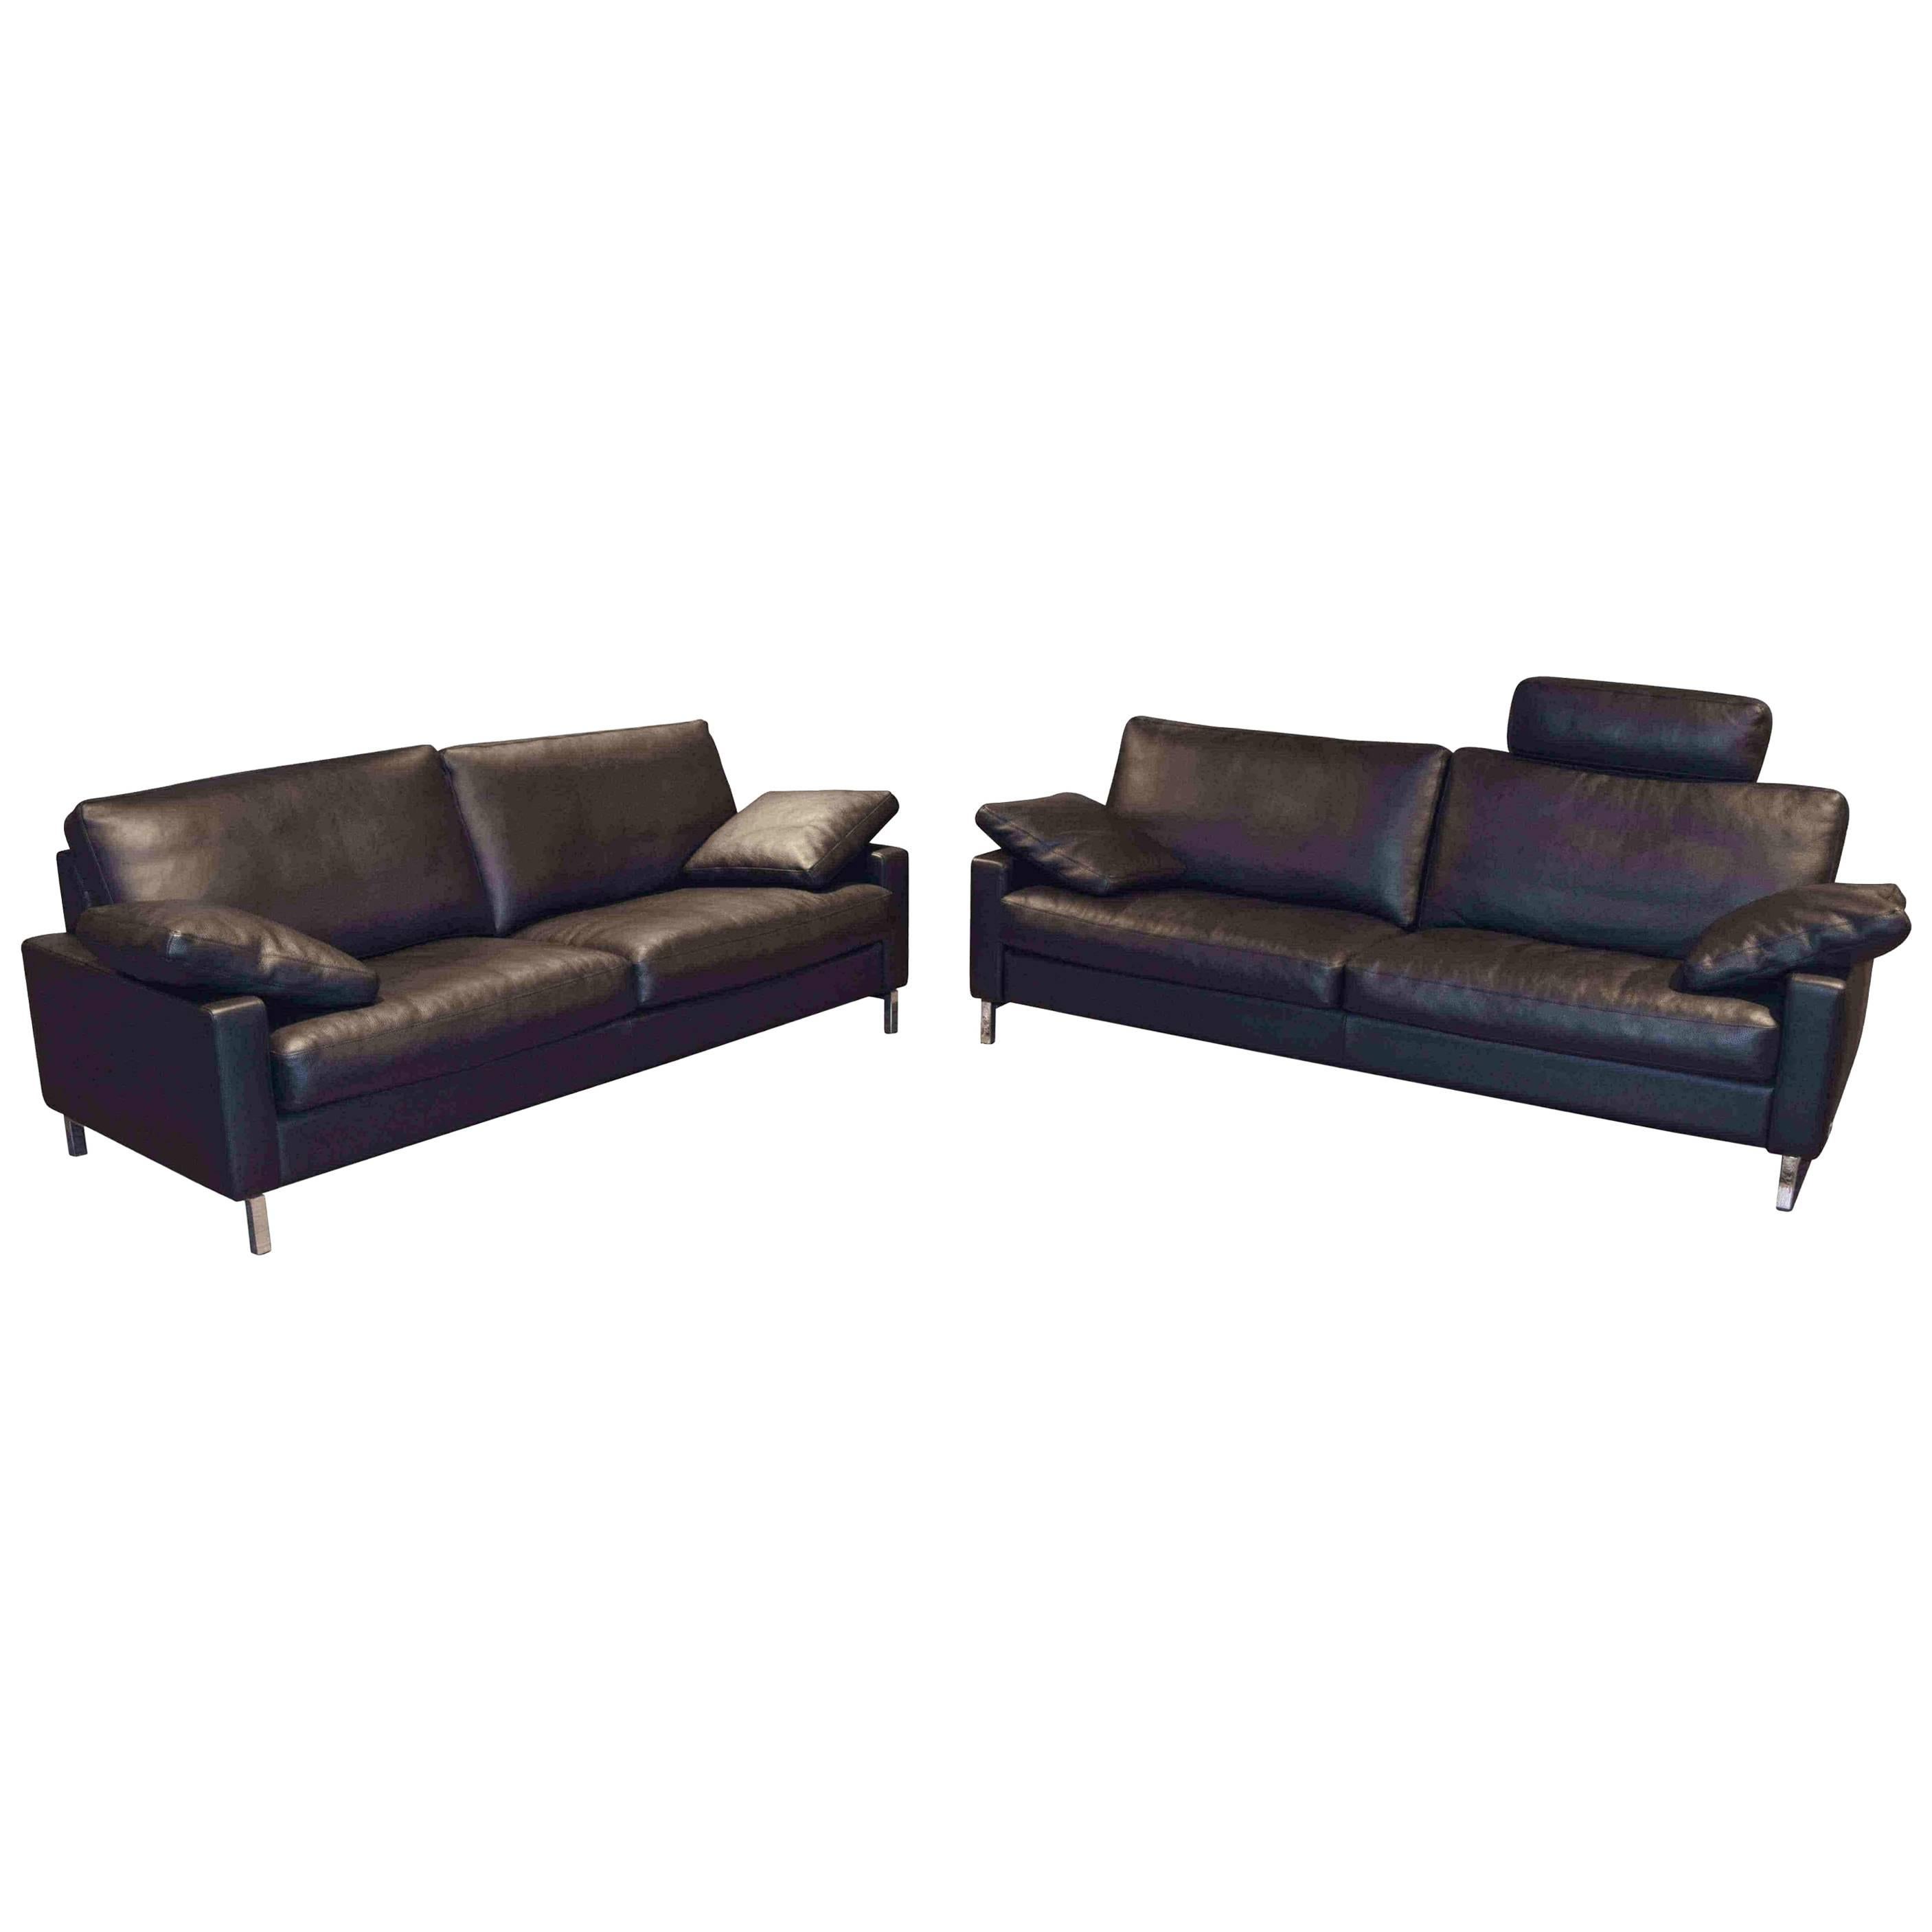 Set of Two Leather Sofas by Famous German Manufacture WK Wohnen For Sale